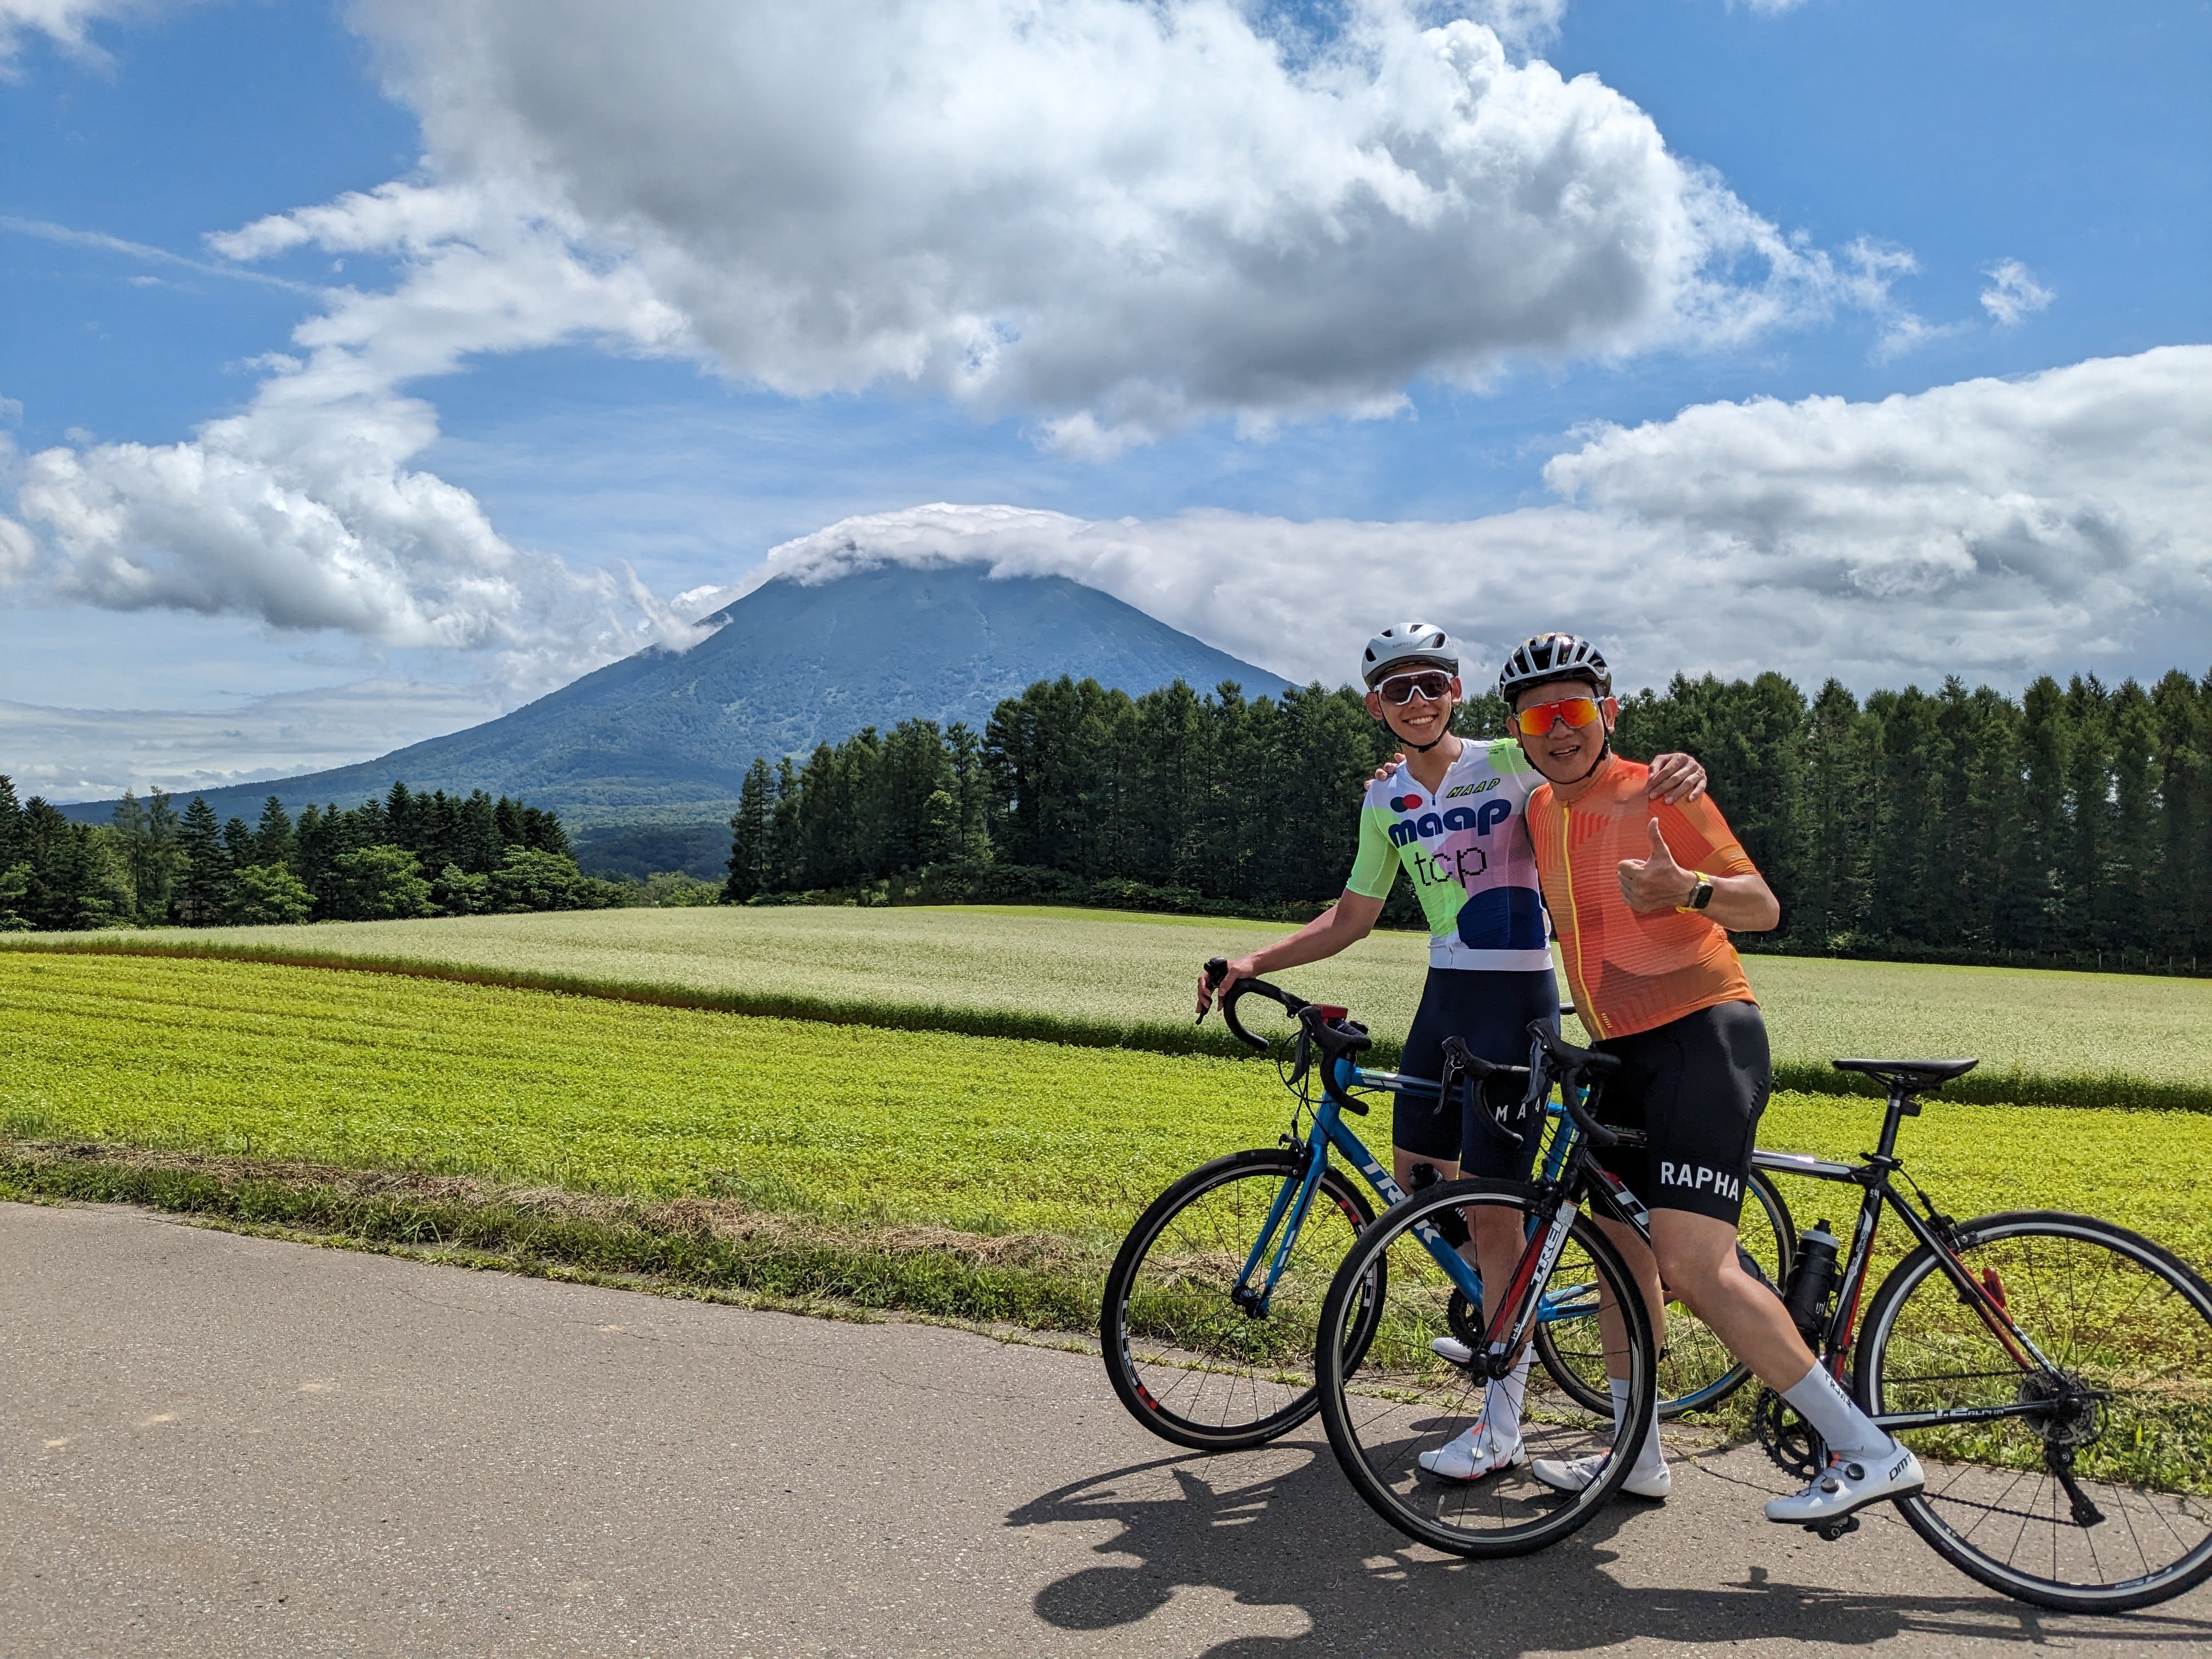 Two cyclists happily pose in front of blooming fields, with Mt. Yotei wreathed in cloud behind them.